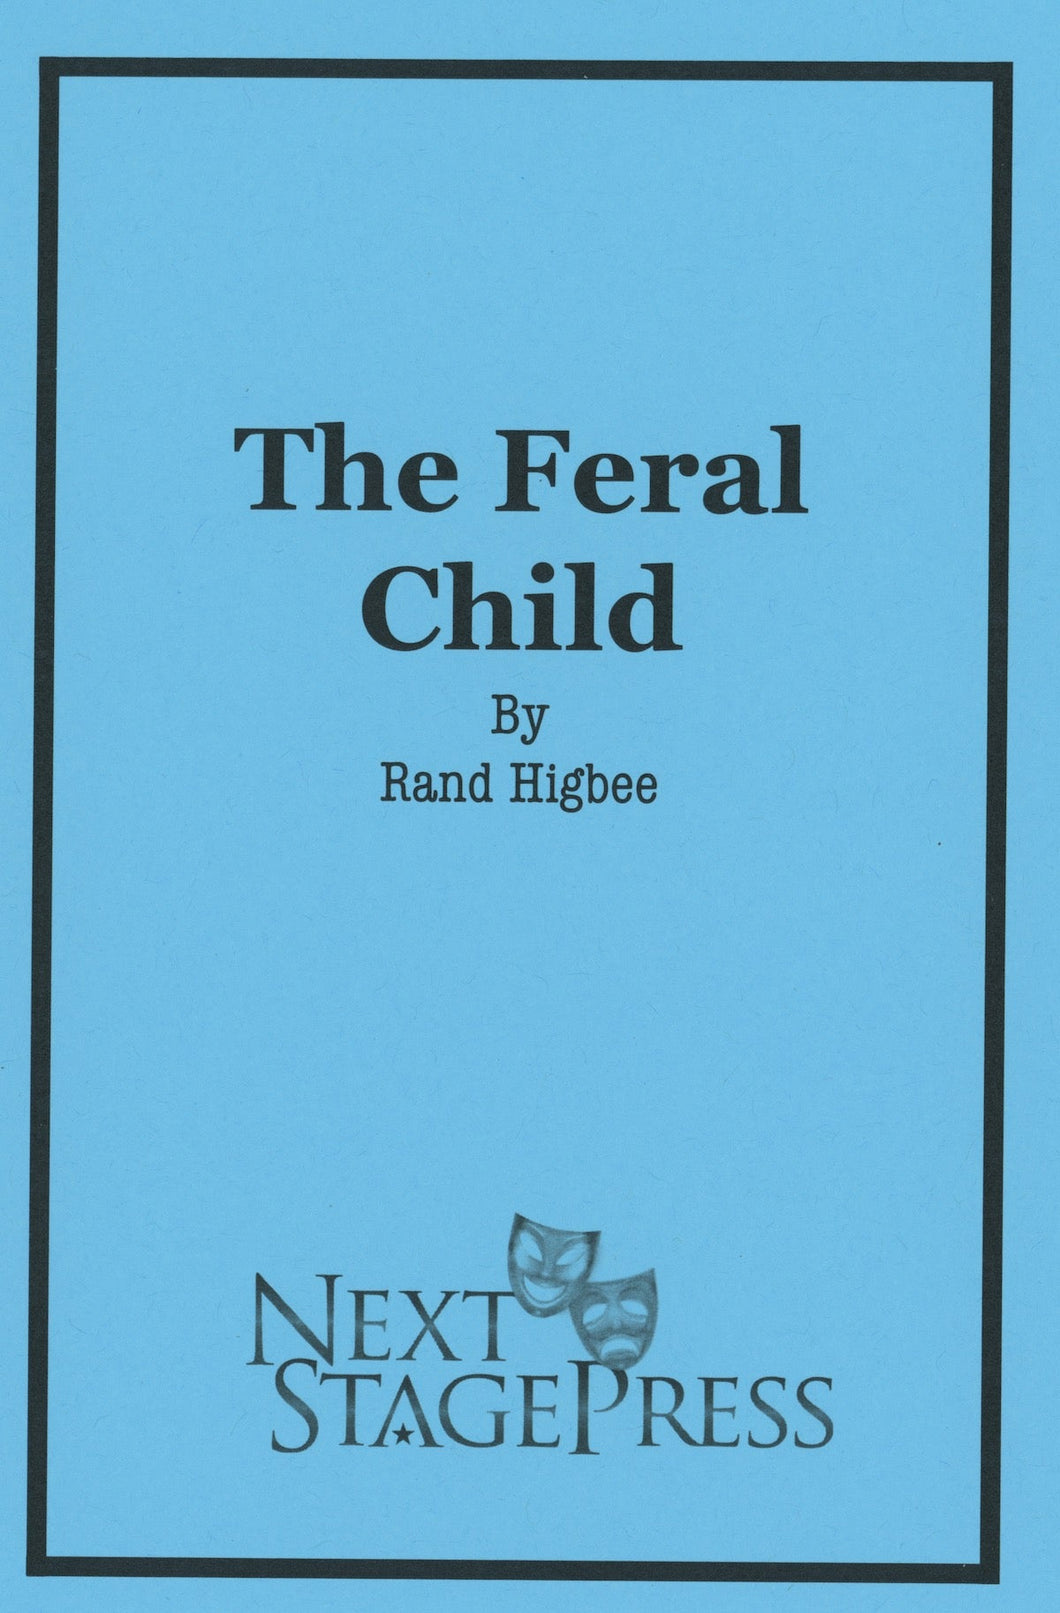 THE FERAL CHILD by Rand Higbee - Digital Version